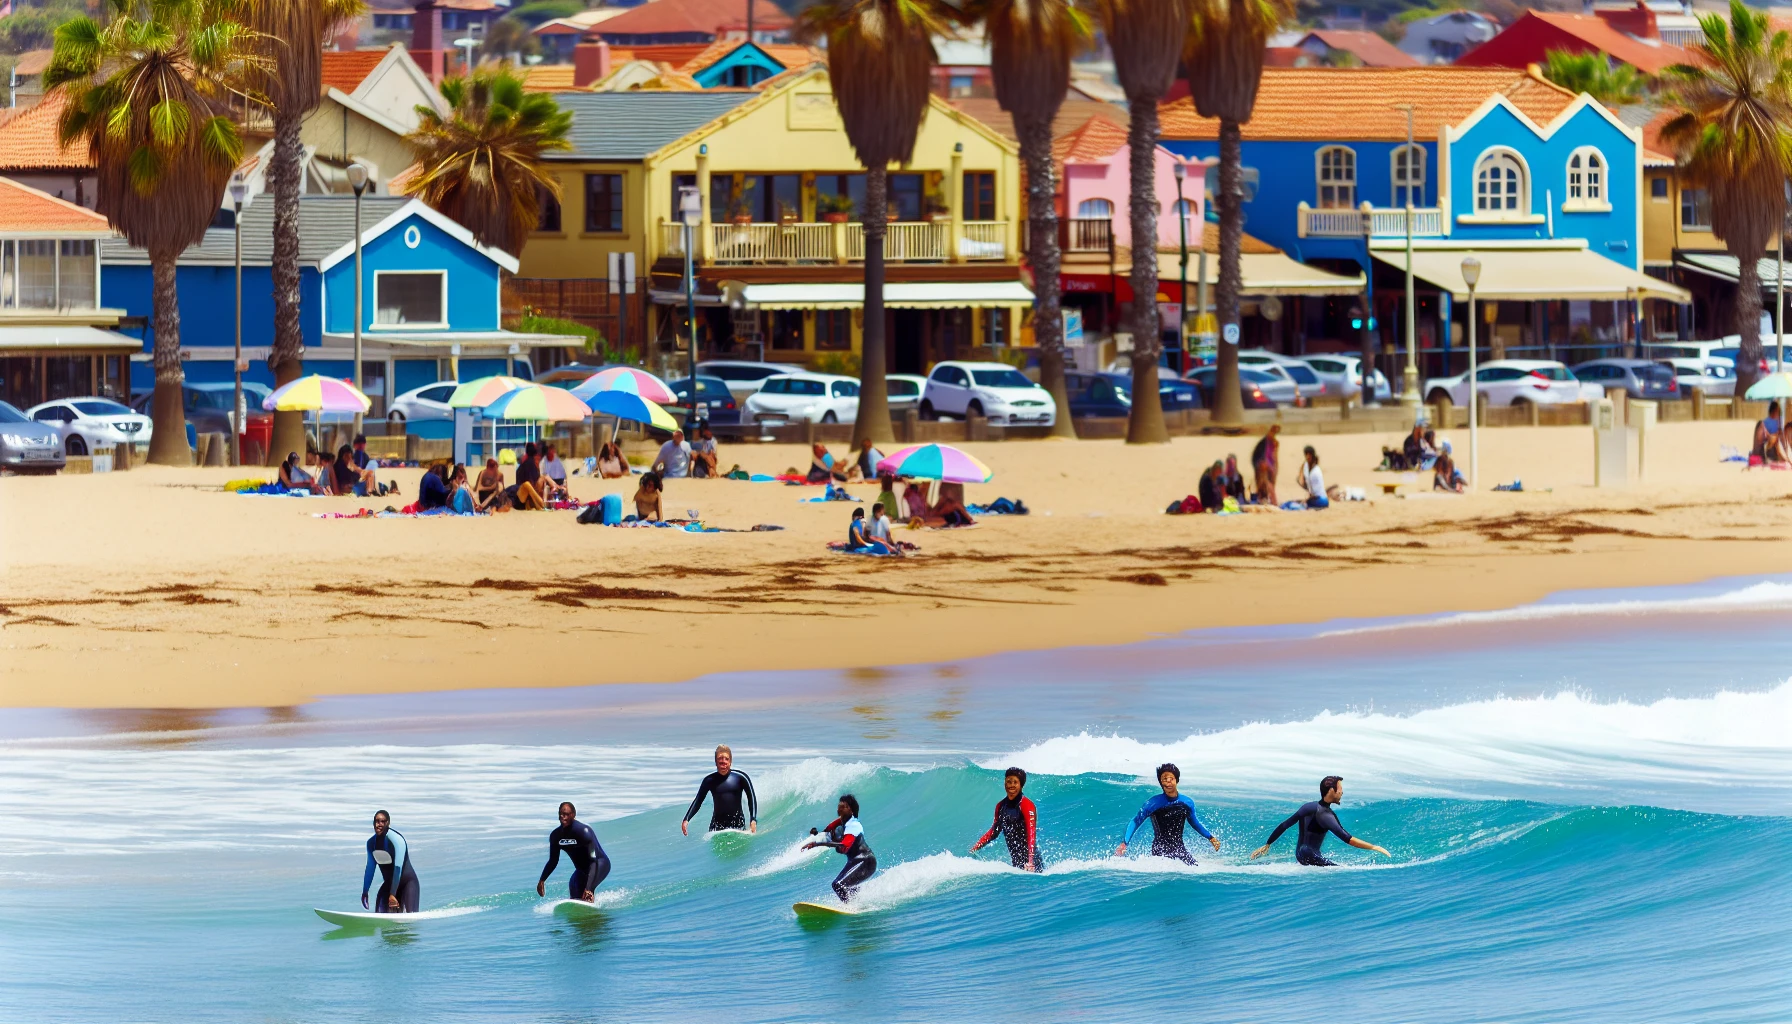 Lively beach town with surfers and palm trees